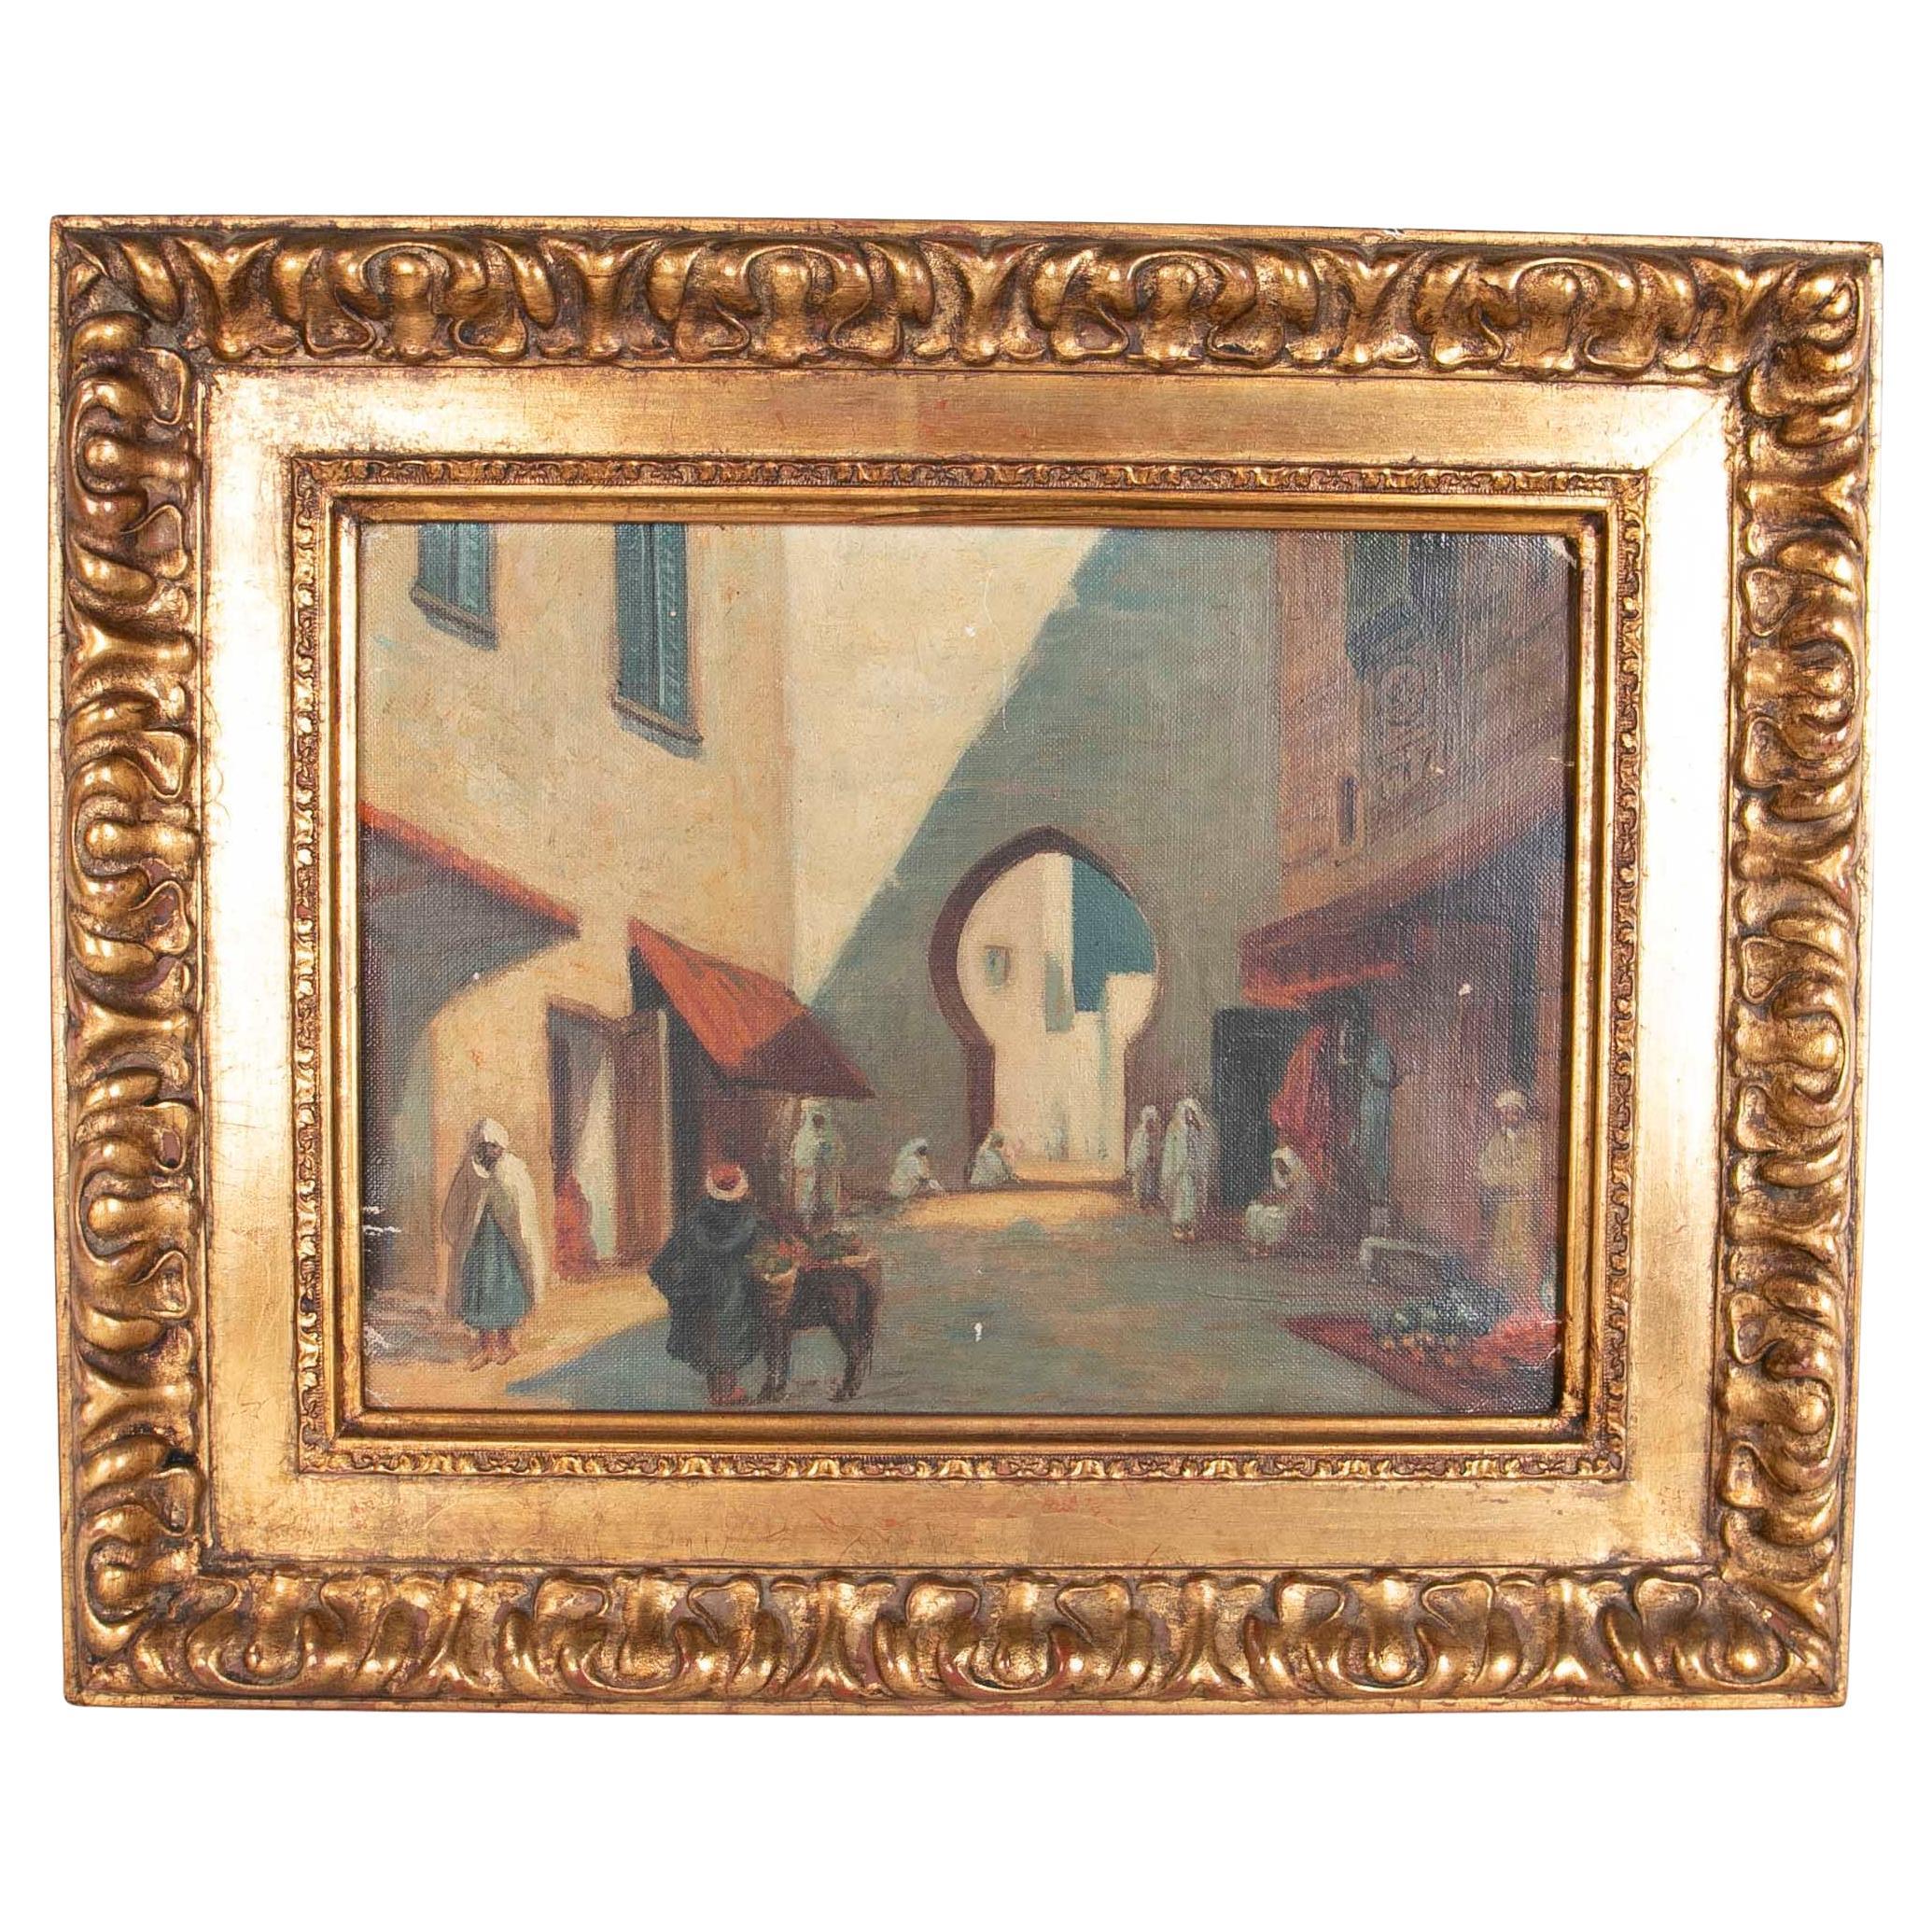 Orientalist Framed Painting of an Arabic City Dated 1884